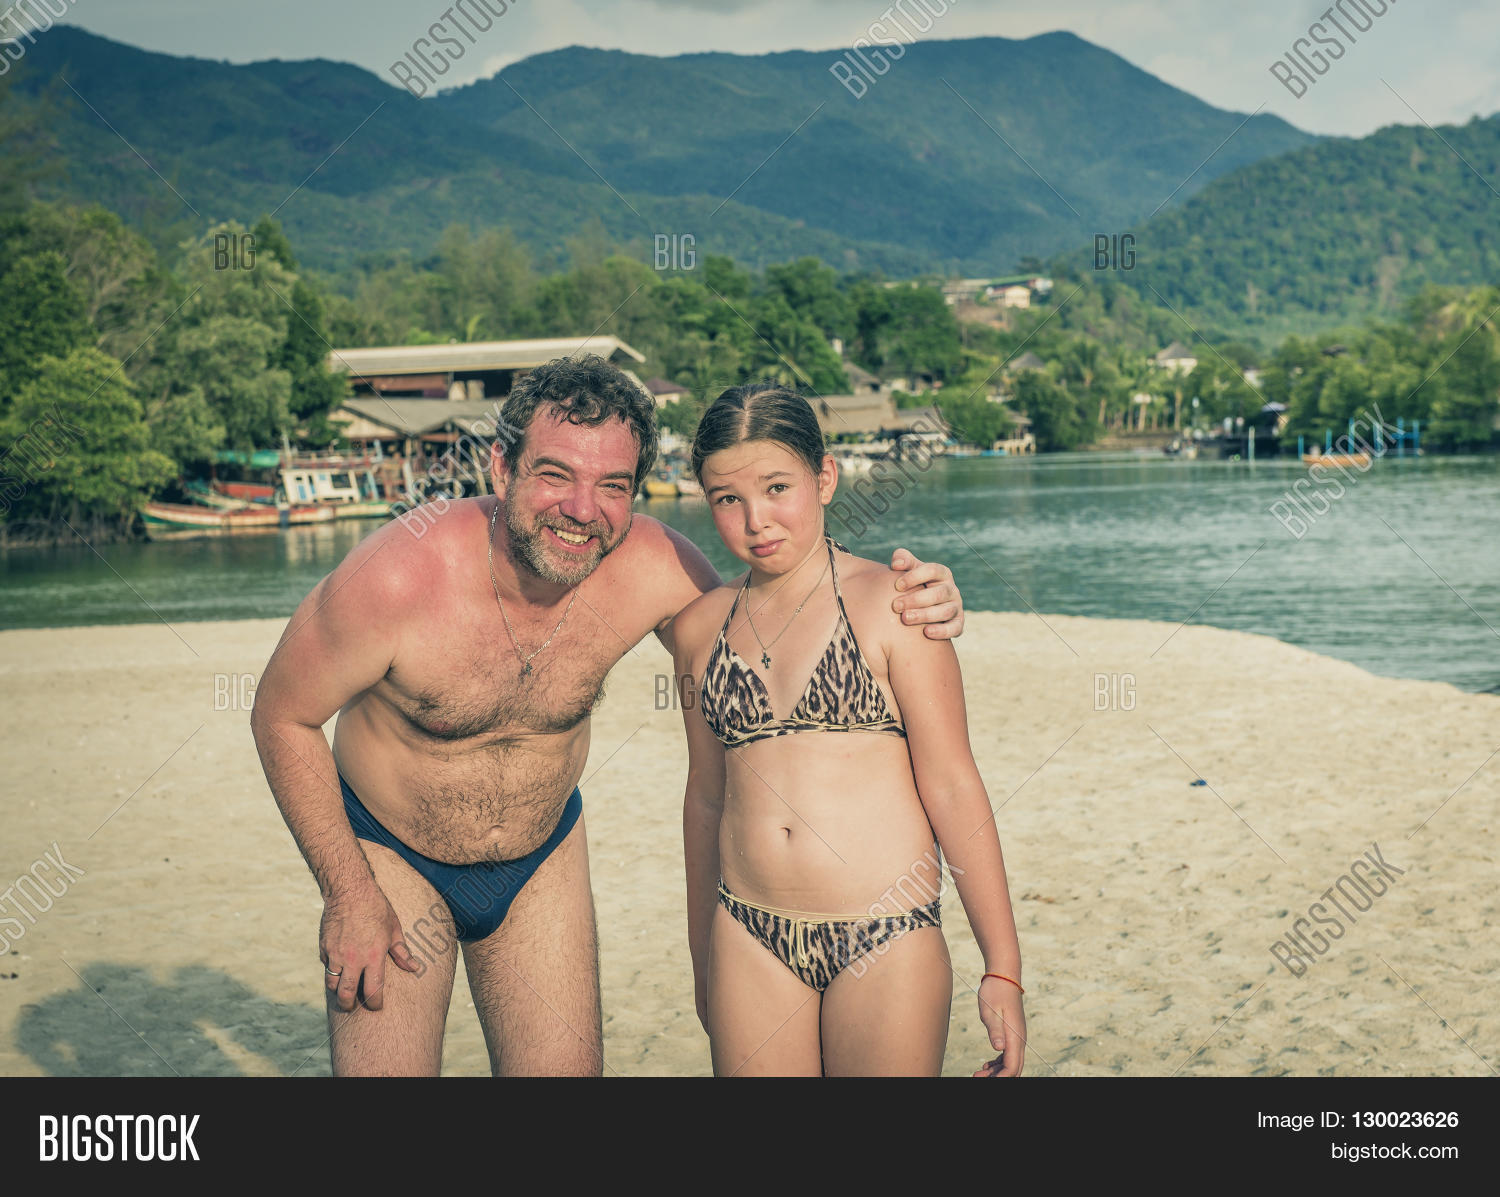 chris scullion recommends real dad and daughter pic